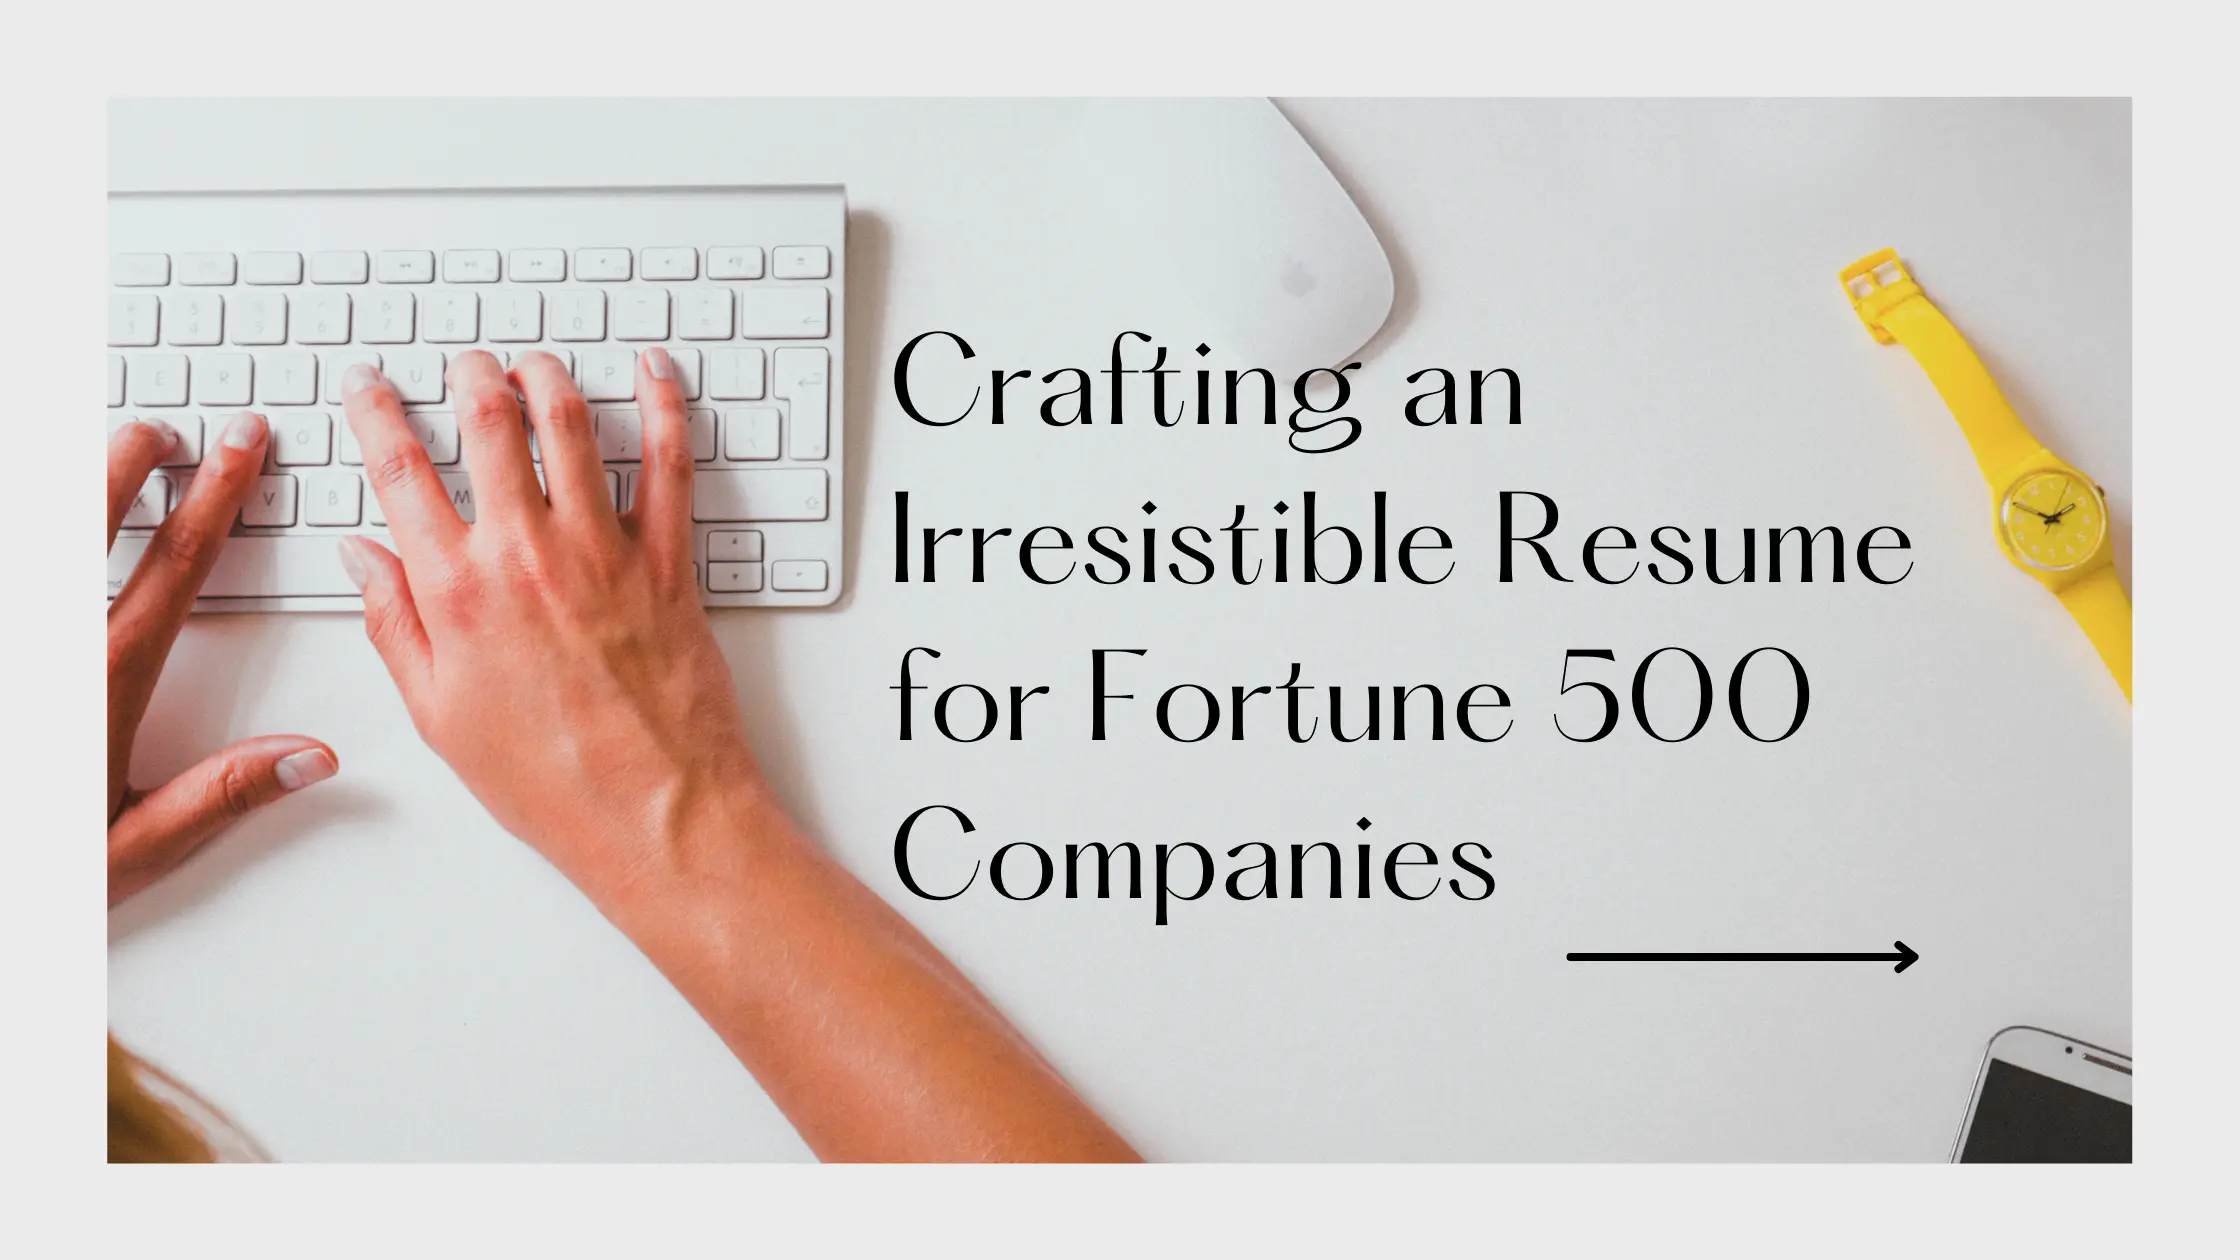 Crafting an Irresistible Resume for Fortune 500 Companies